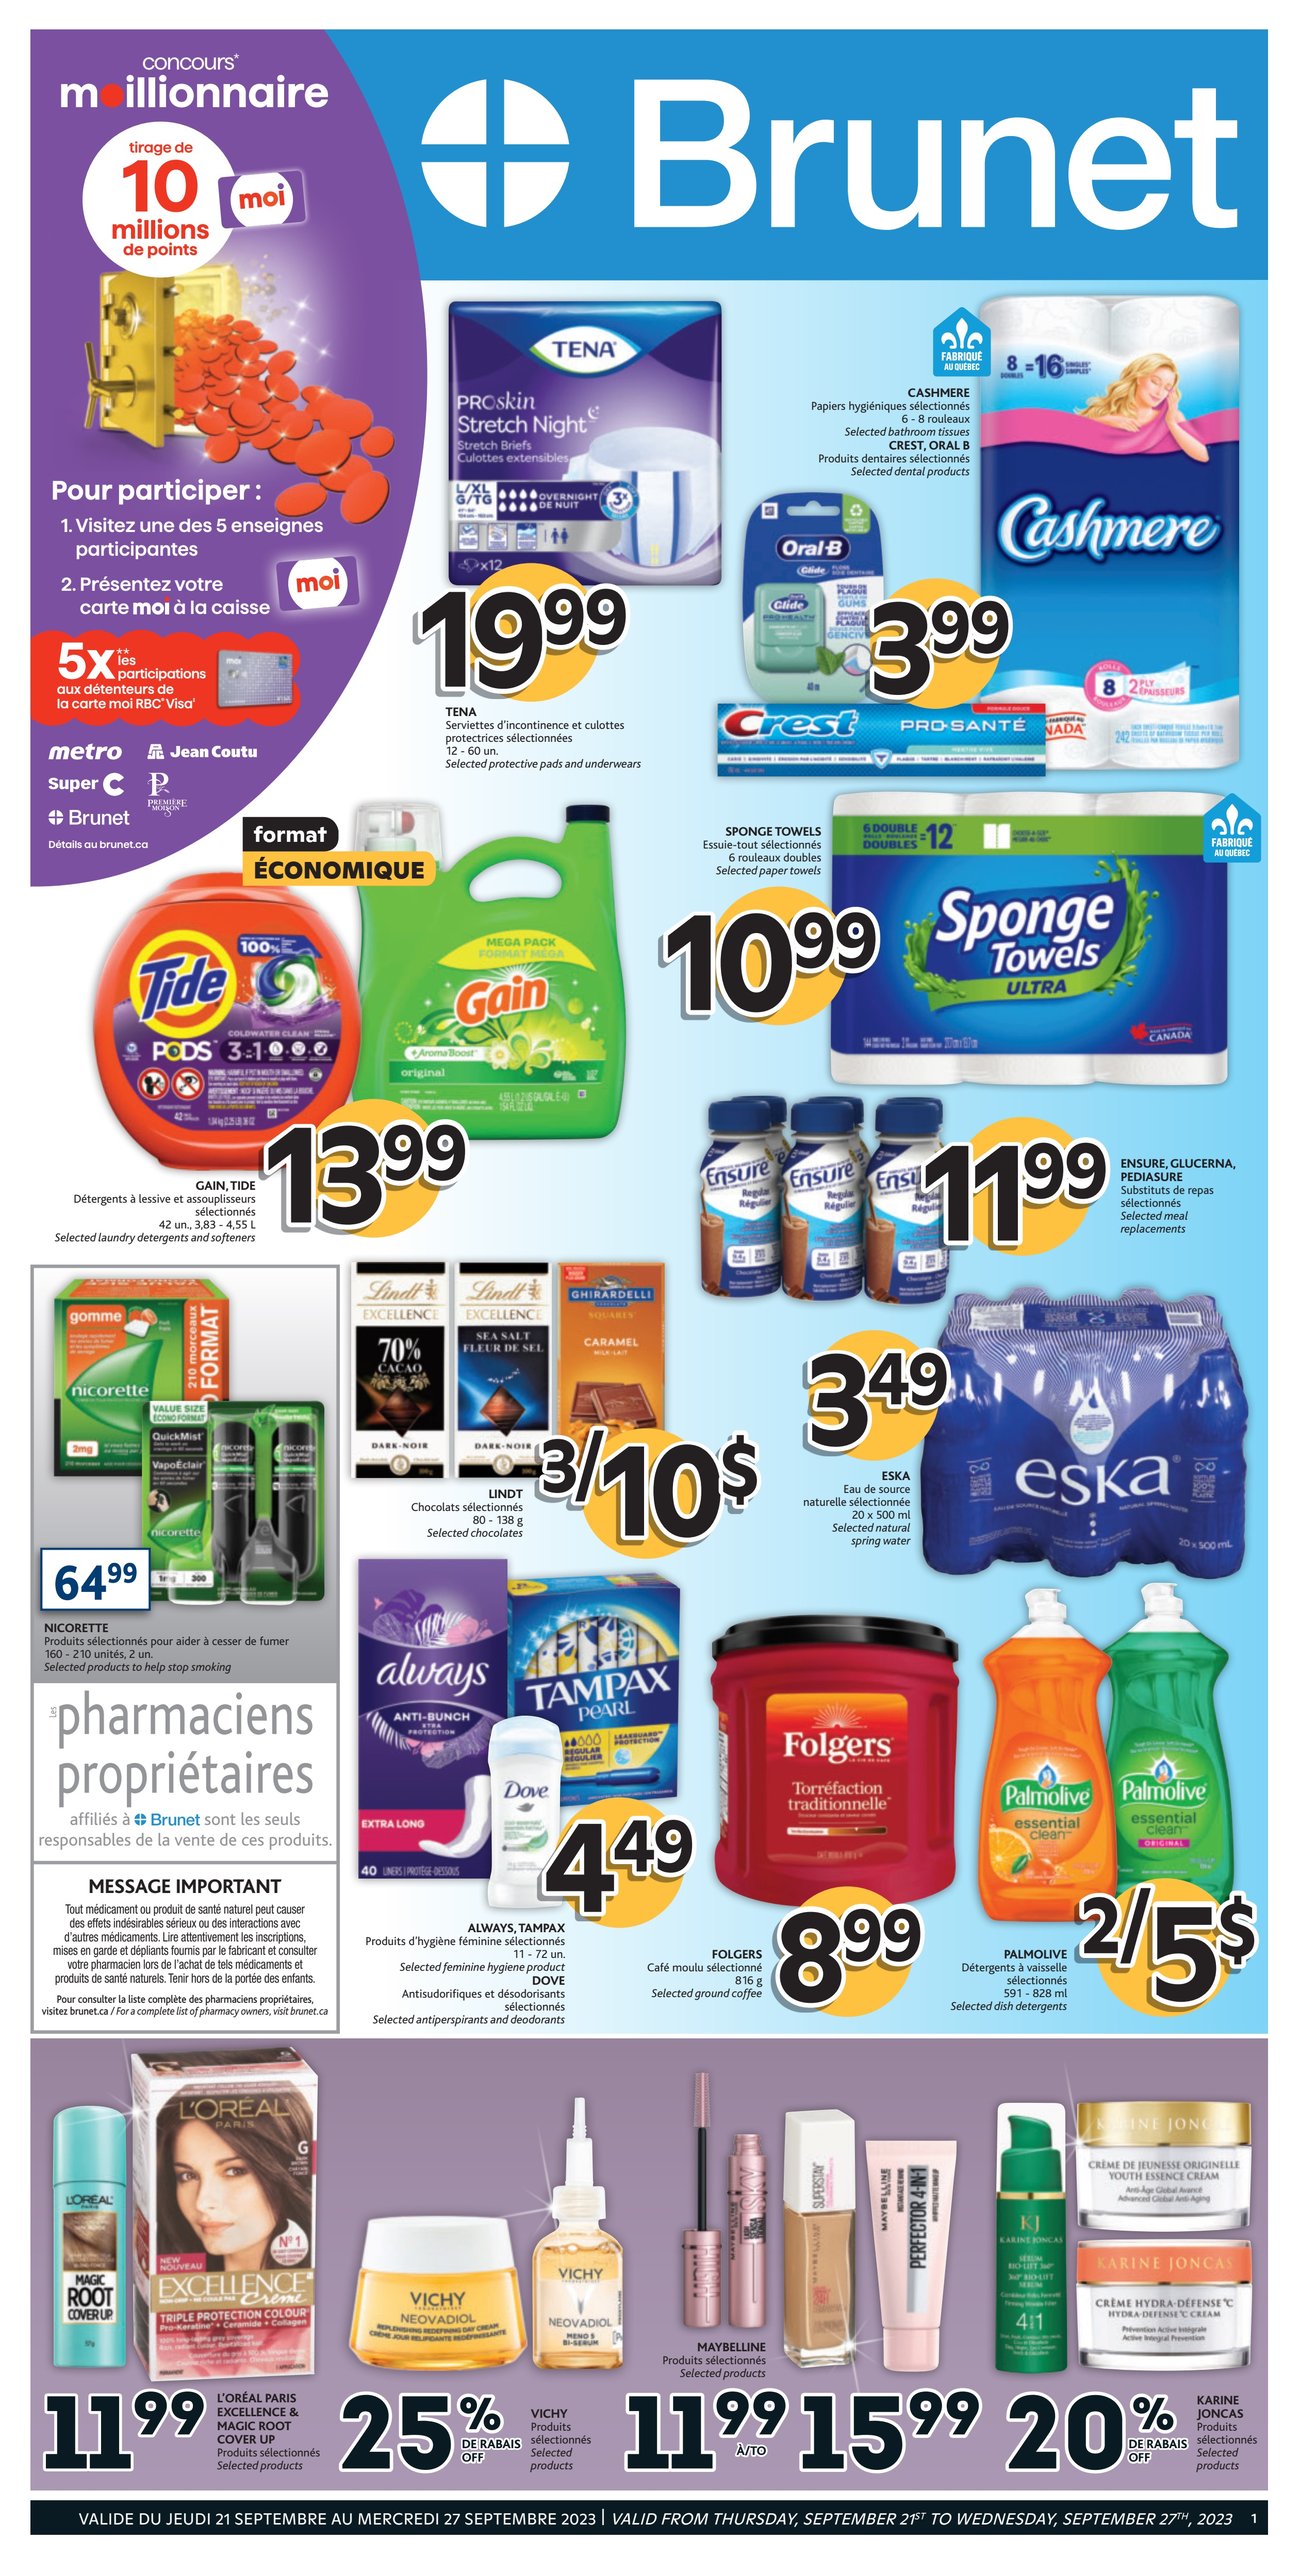 Brunet - Weekly Flyer Specials - Page 1